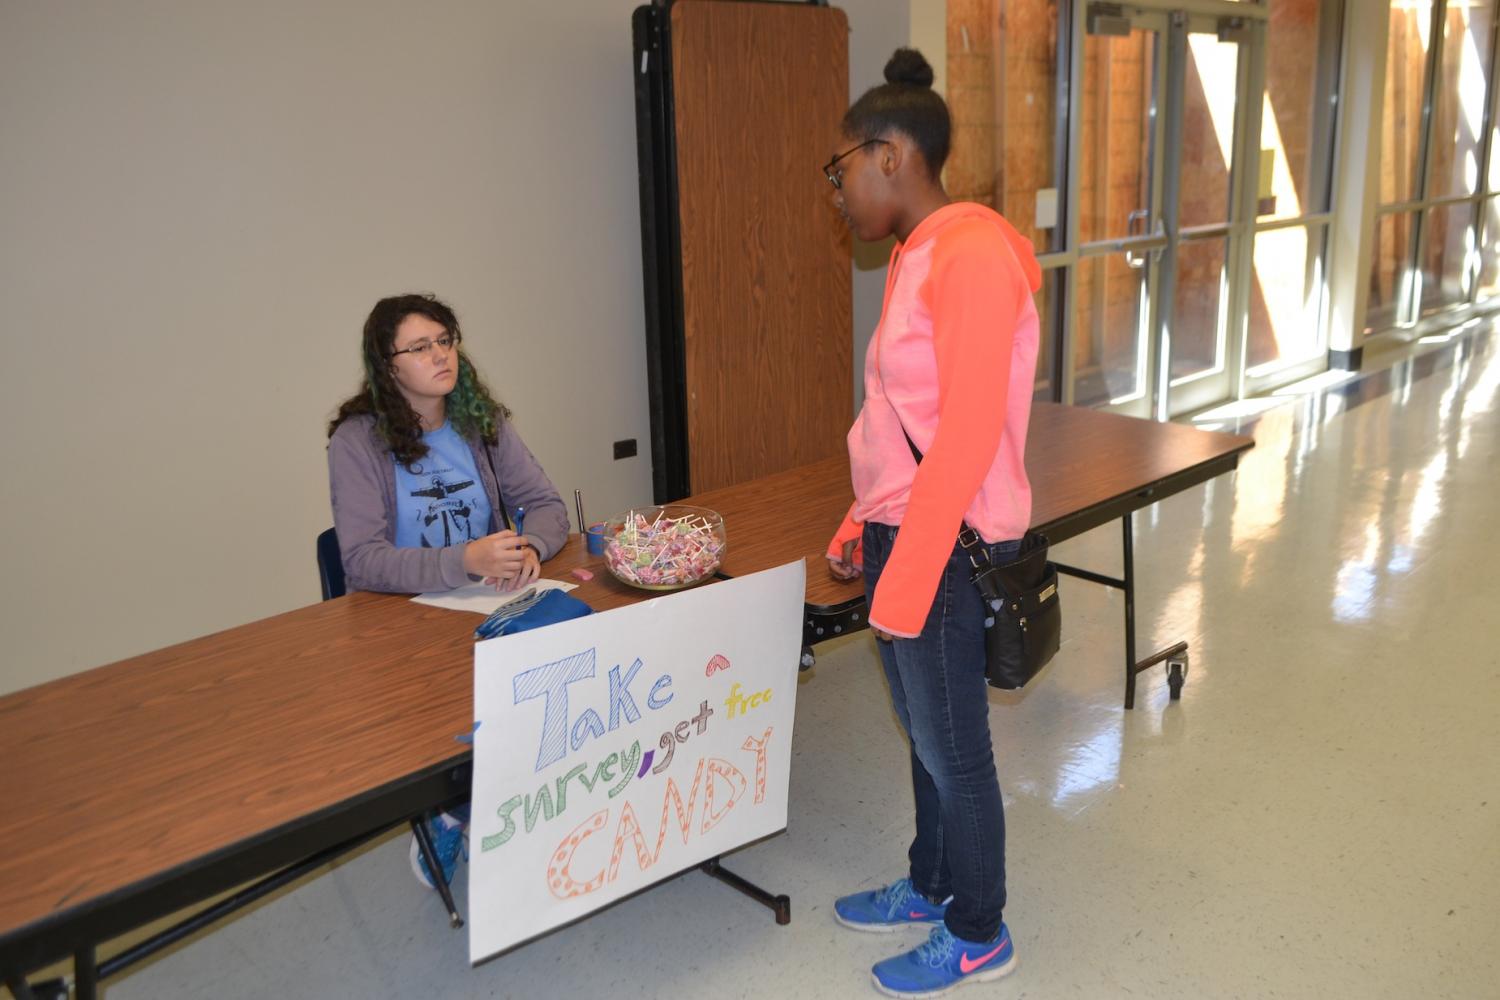 NC student stops by to talk to a fellow student hosting a survey. The survey, open to all students during lunch, offers free candy to those that answer brief questions.  The technique drew students’ attentions throughout the lunch period.